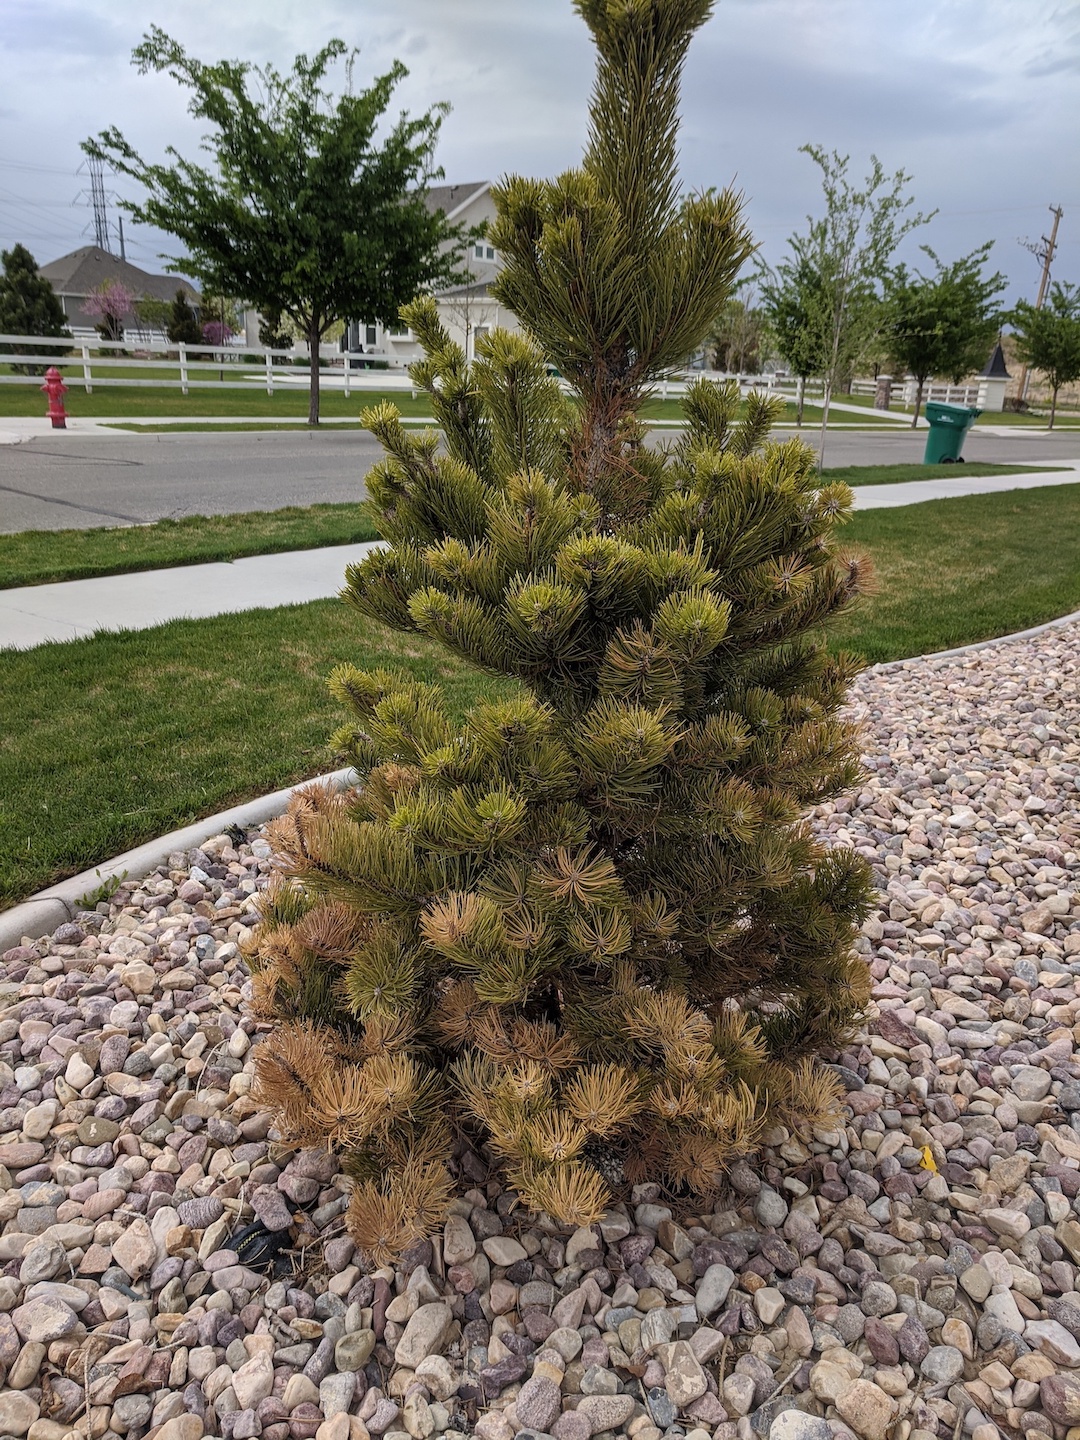 Small pine tree with browning needles at base